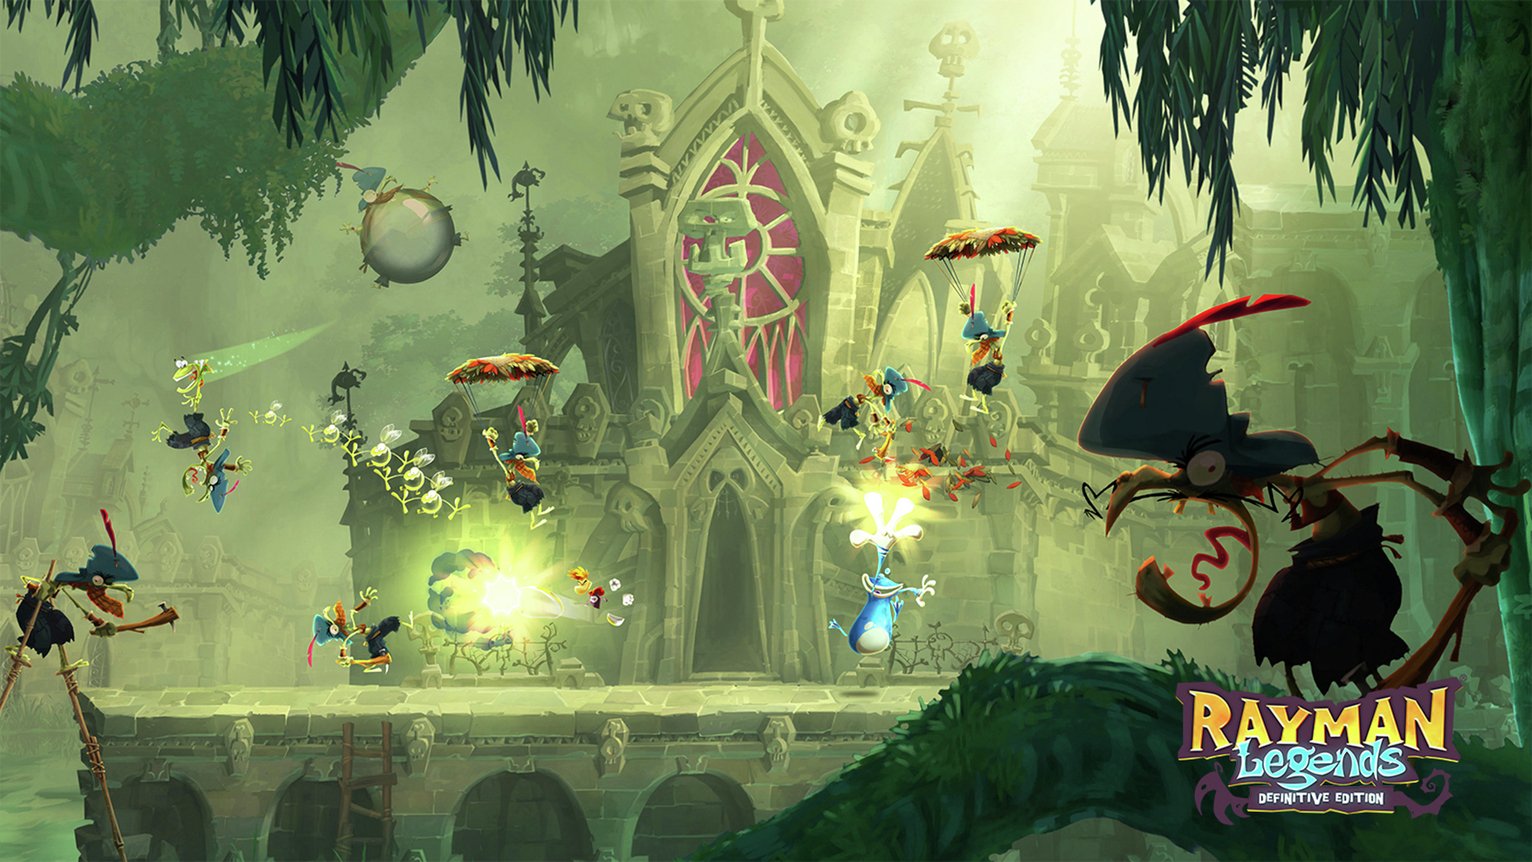 Rayman Legends Nintendo Switch Game Review